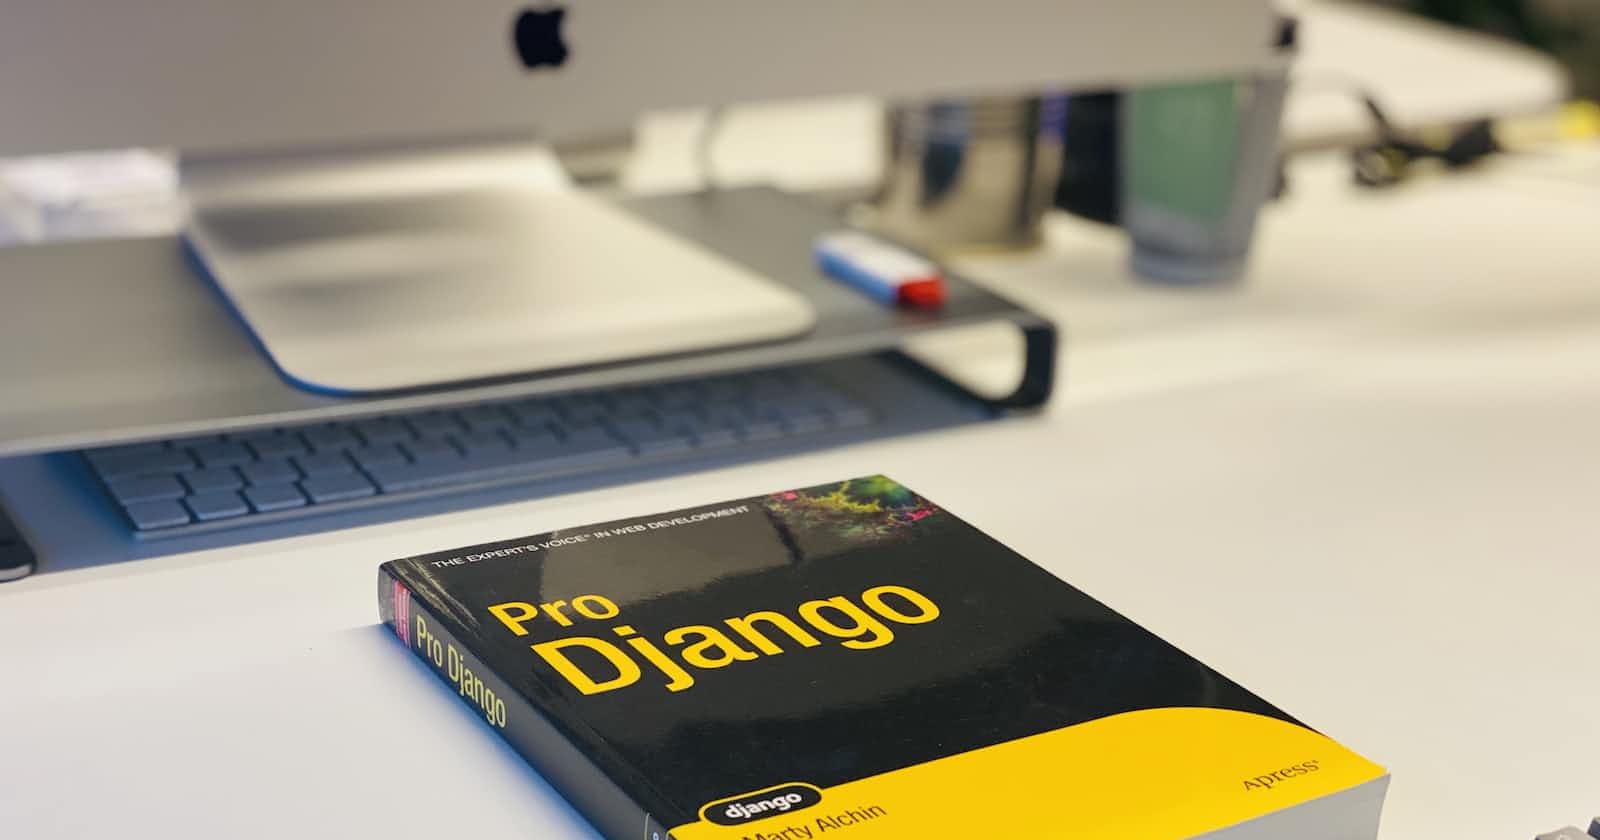 Getting Started with Django: A Step-by-Step Guide